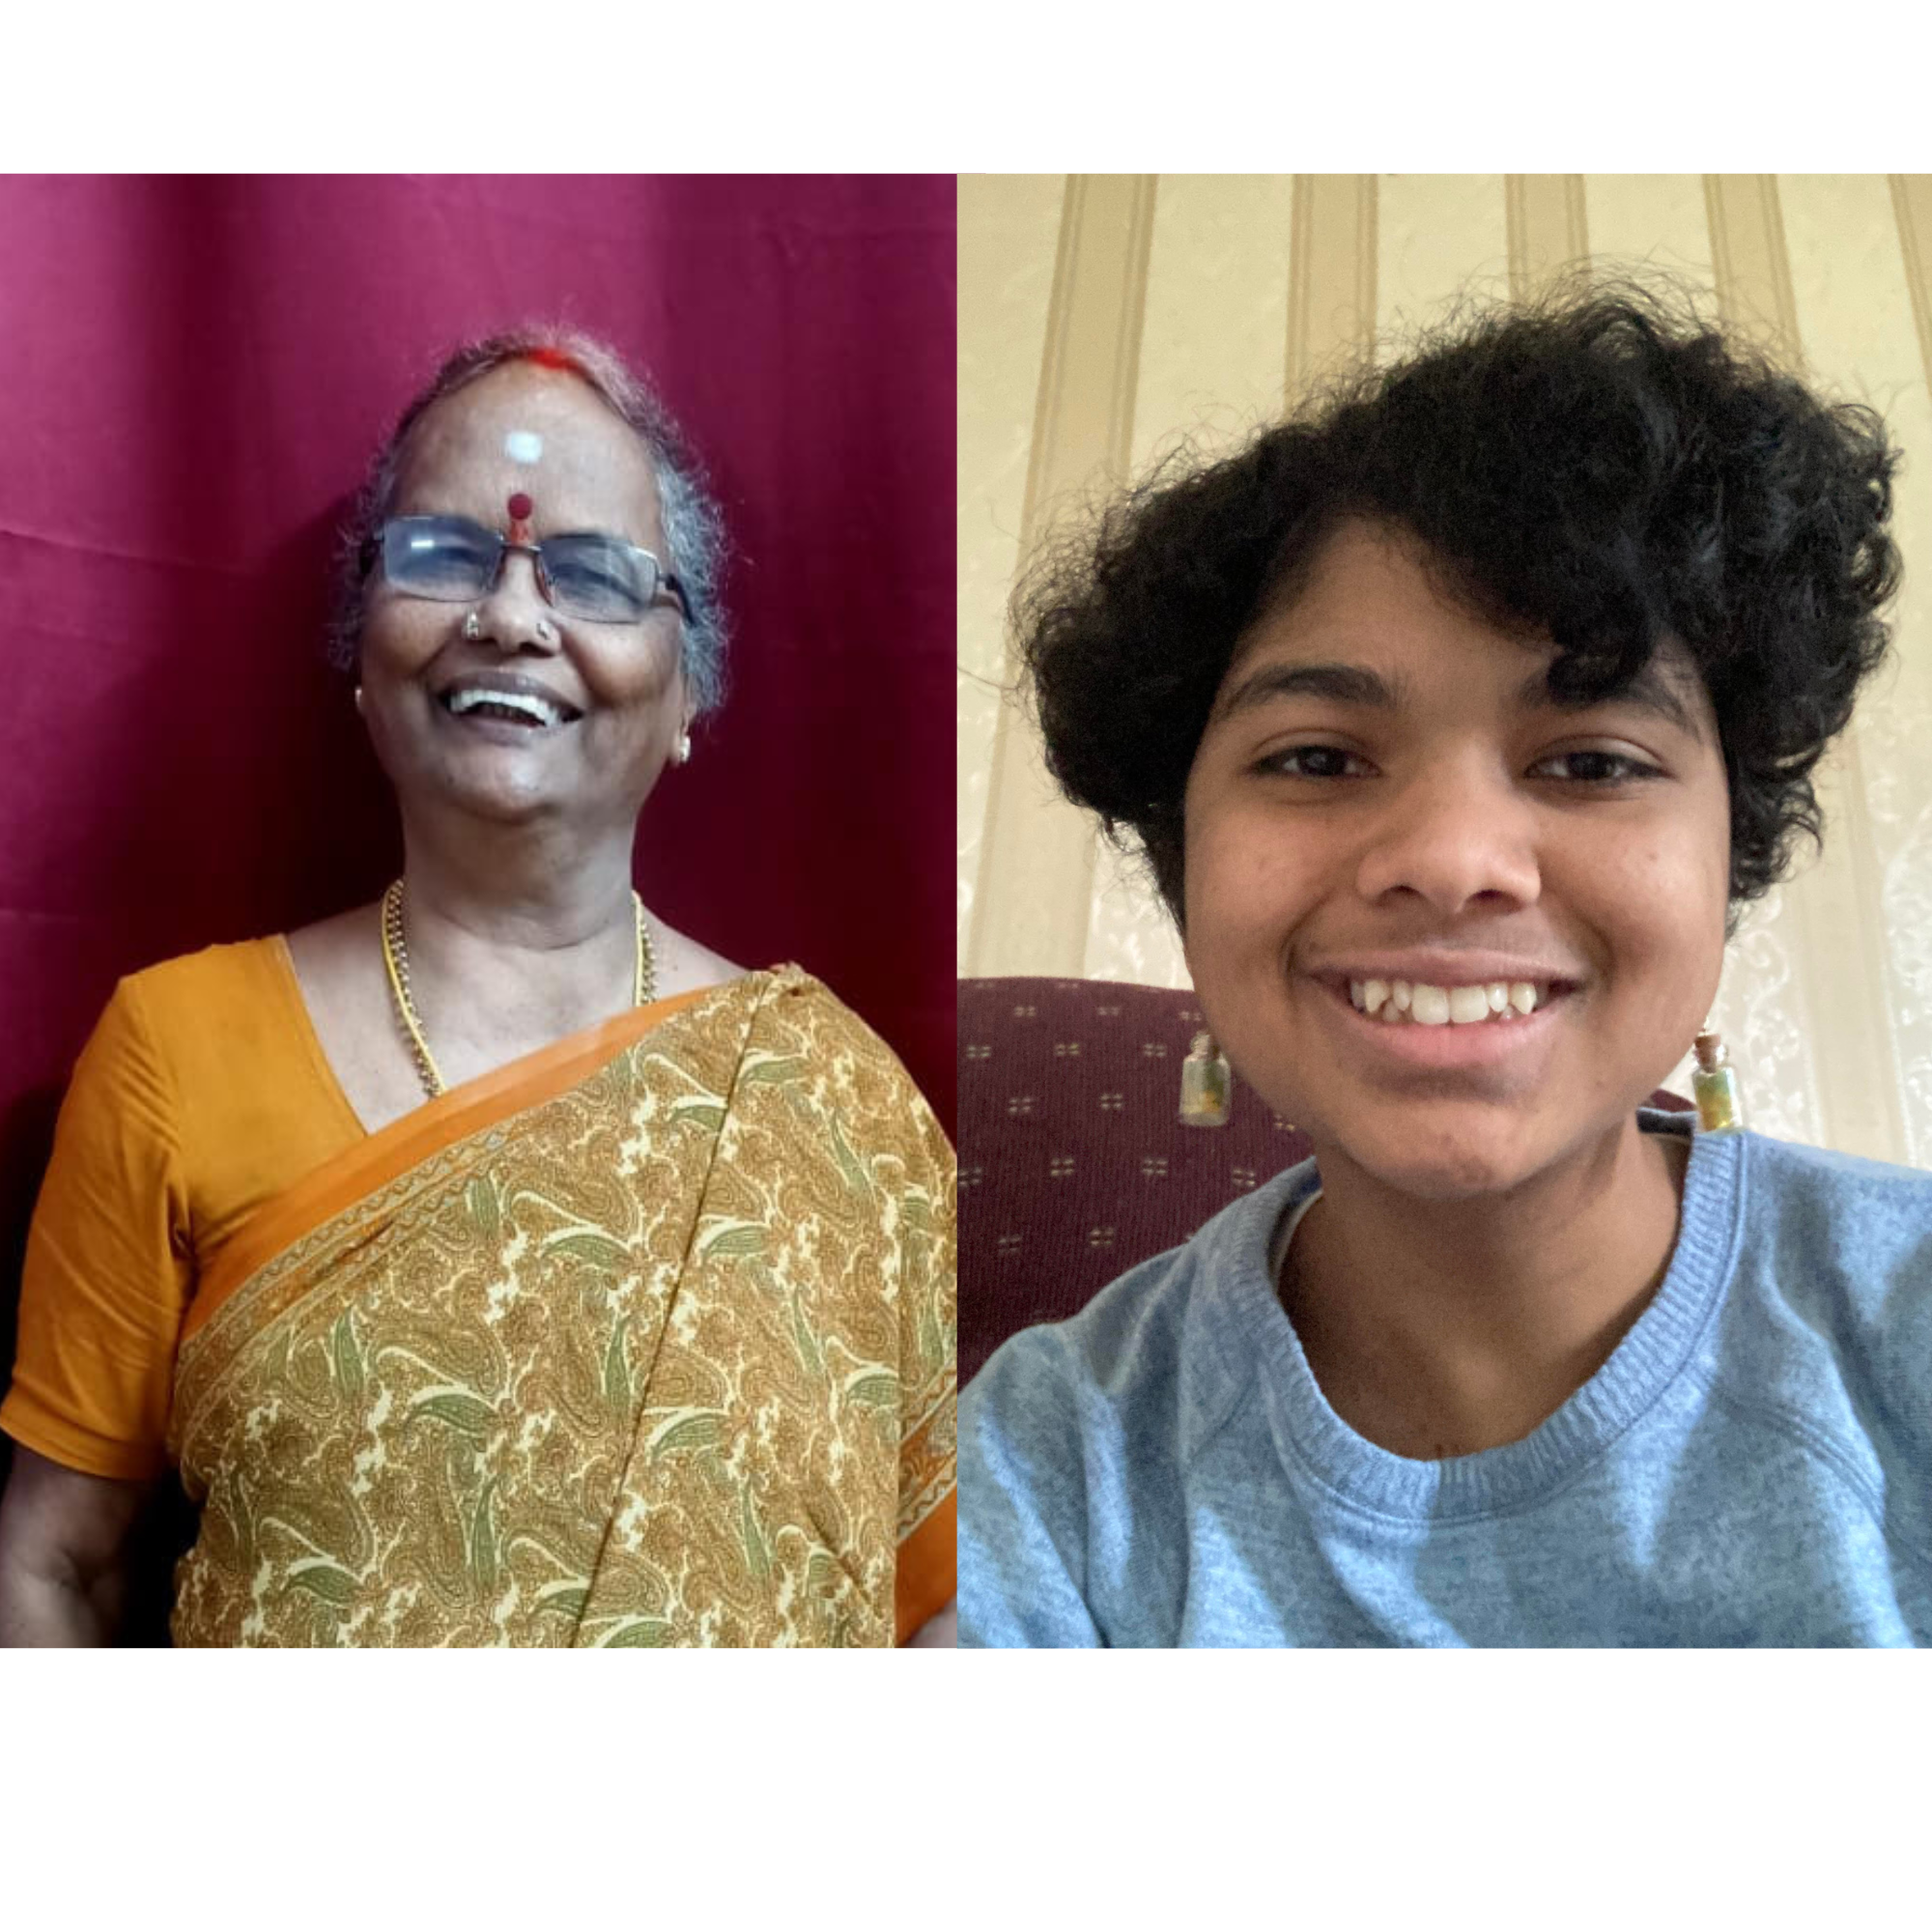 Aditi Iyer (14) interviews her grandmother in India, Shantha Dhandapani (70) about her upbringing and her previous jobs.